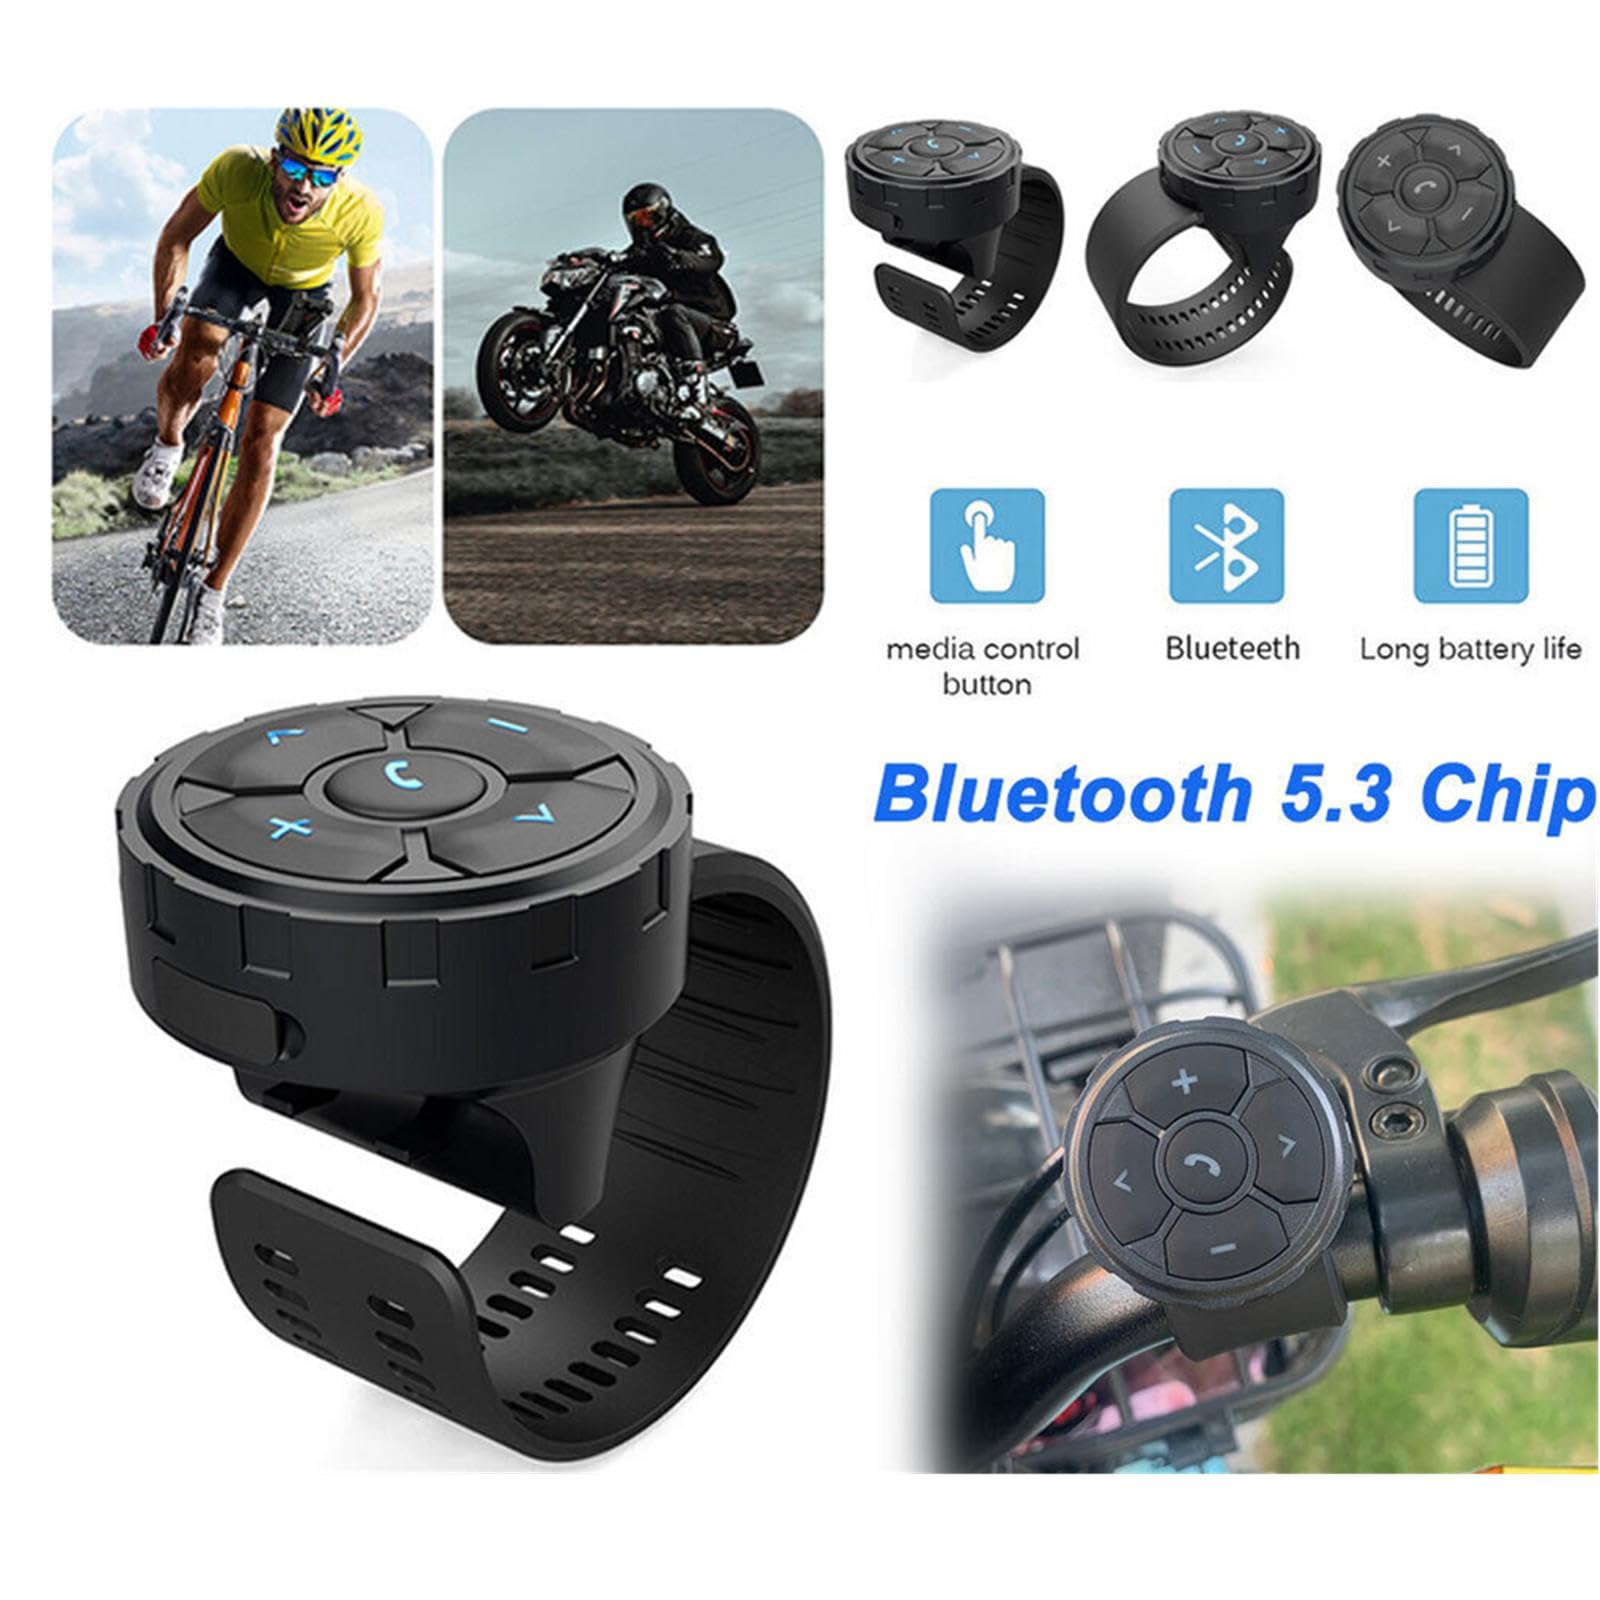 Cell Phone Wireless Bluetooth 5.3 Remote Controller for Motorcycle Bicycle, Selfie Music Control Start Switch